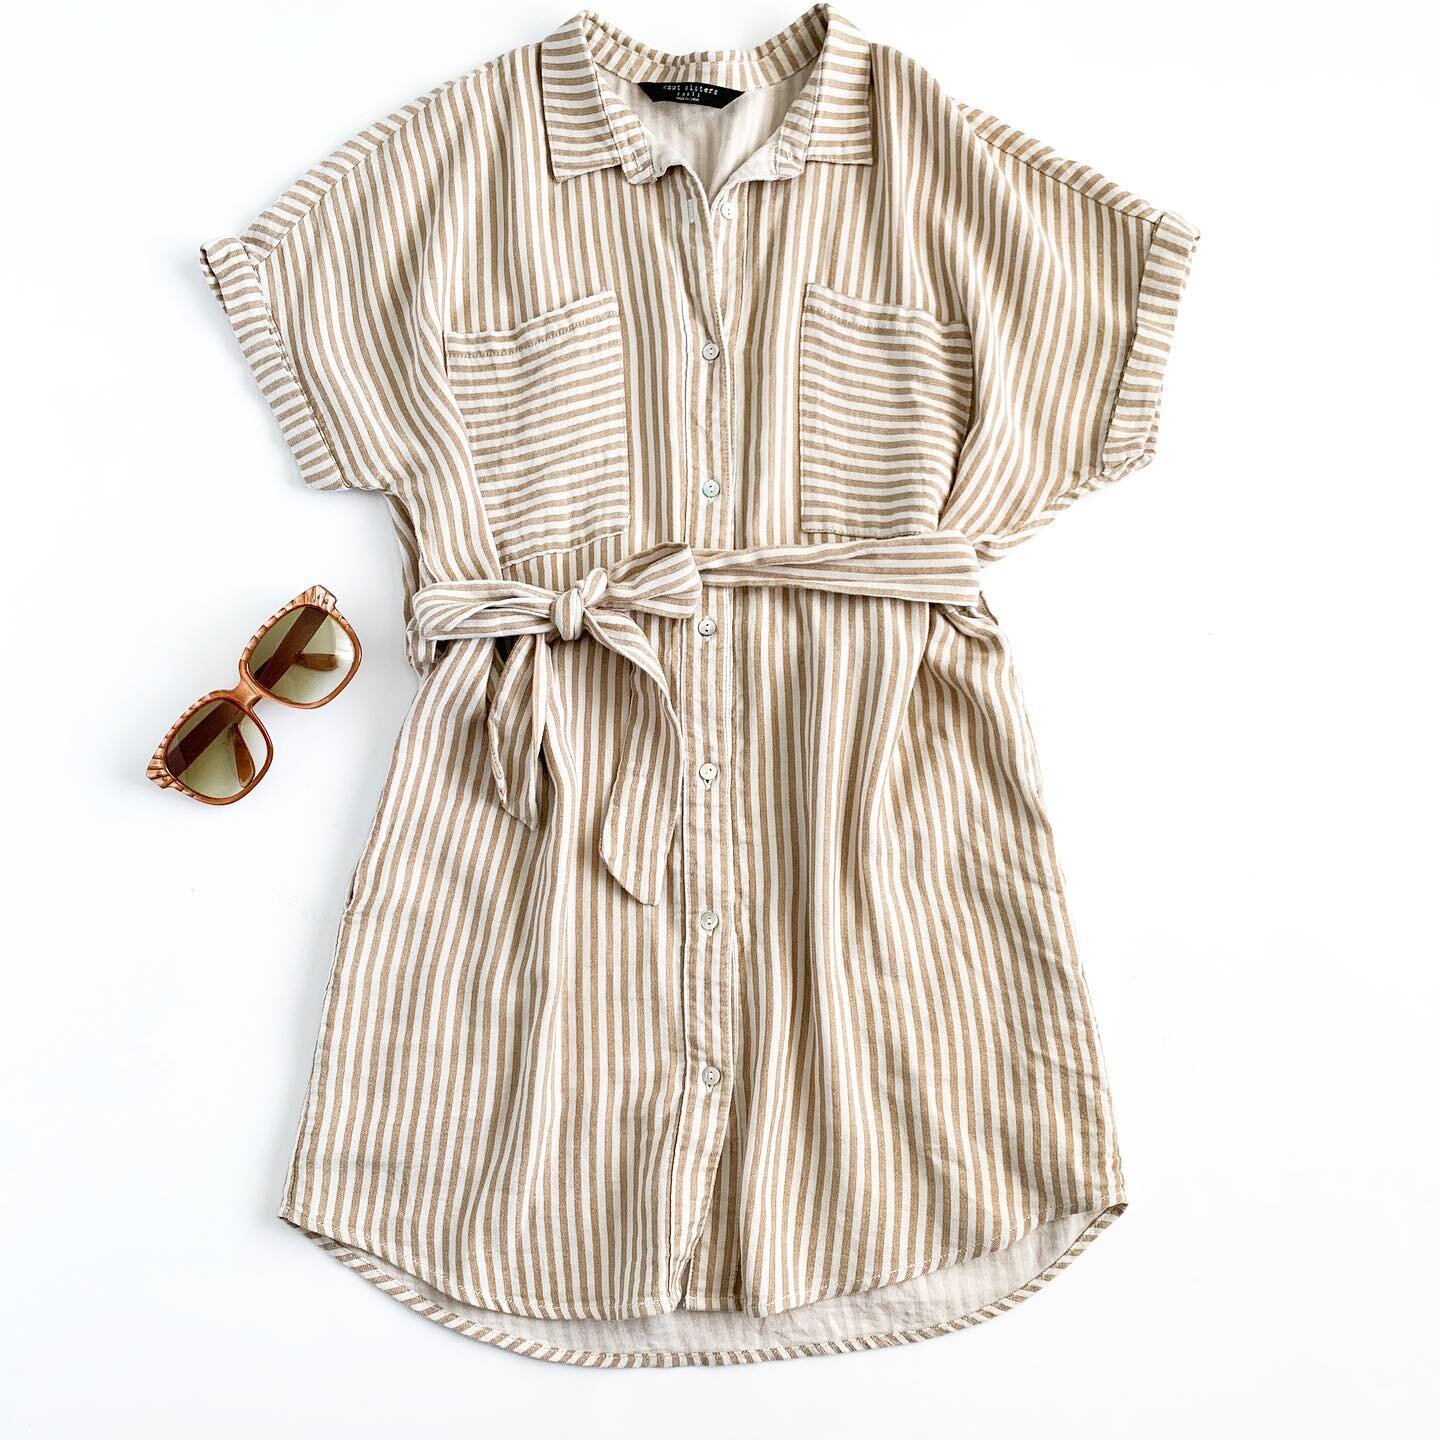 This perfect beachy/boho Knot Sisters shirt dress just hit the shops!
.
Size Small // $35
.
Link in profile or DM me if interested.